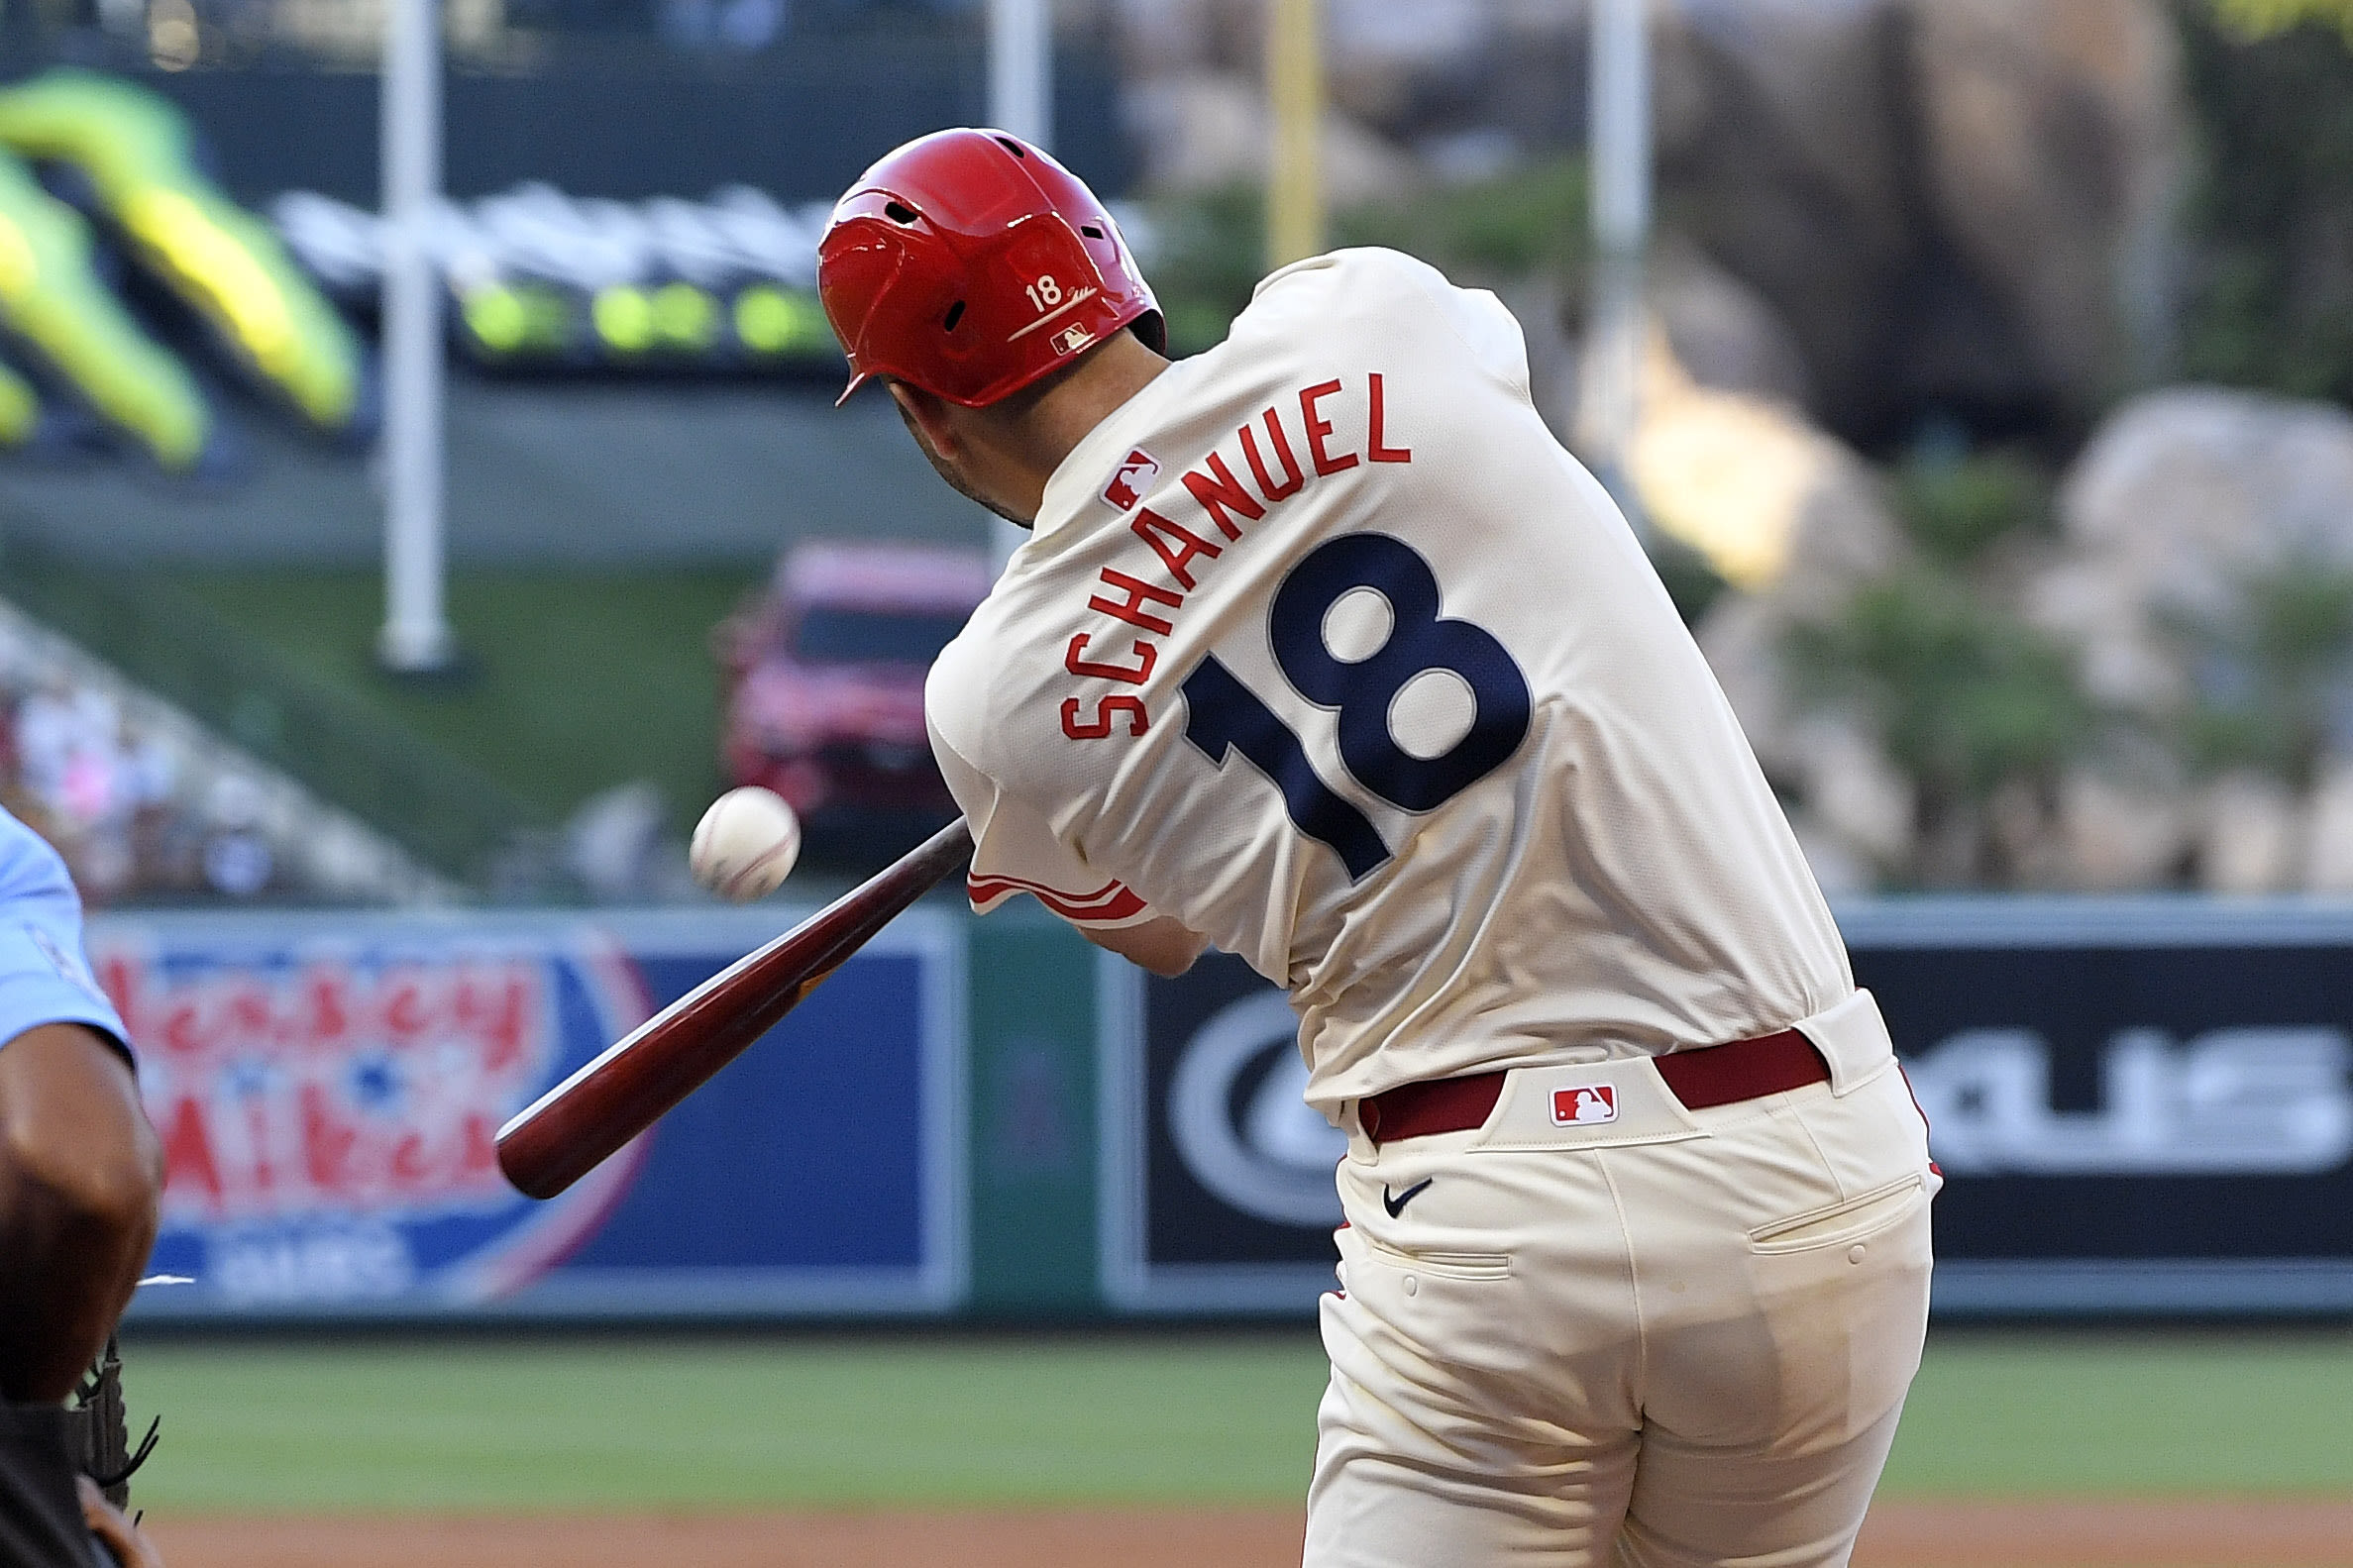 Nolan Schanuel ends hitless skid as Angels sweep the Padres